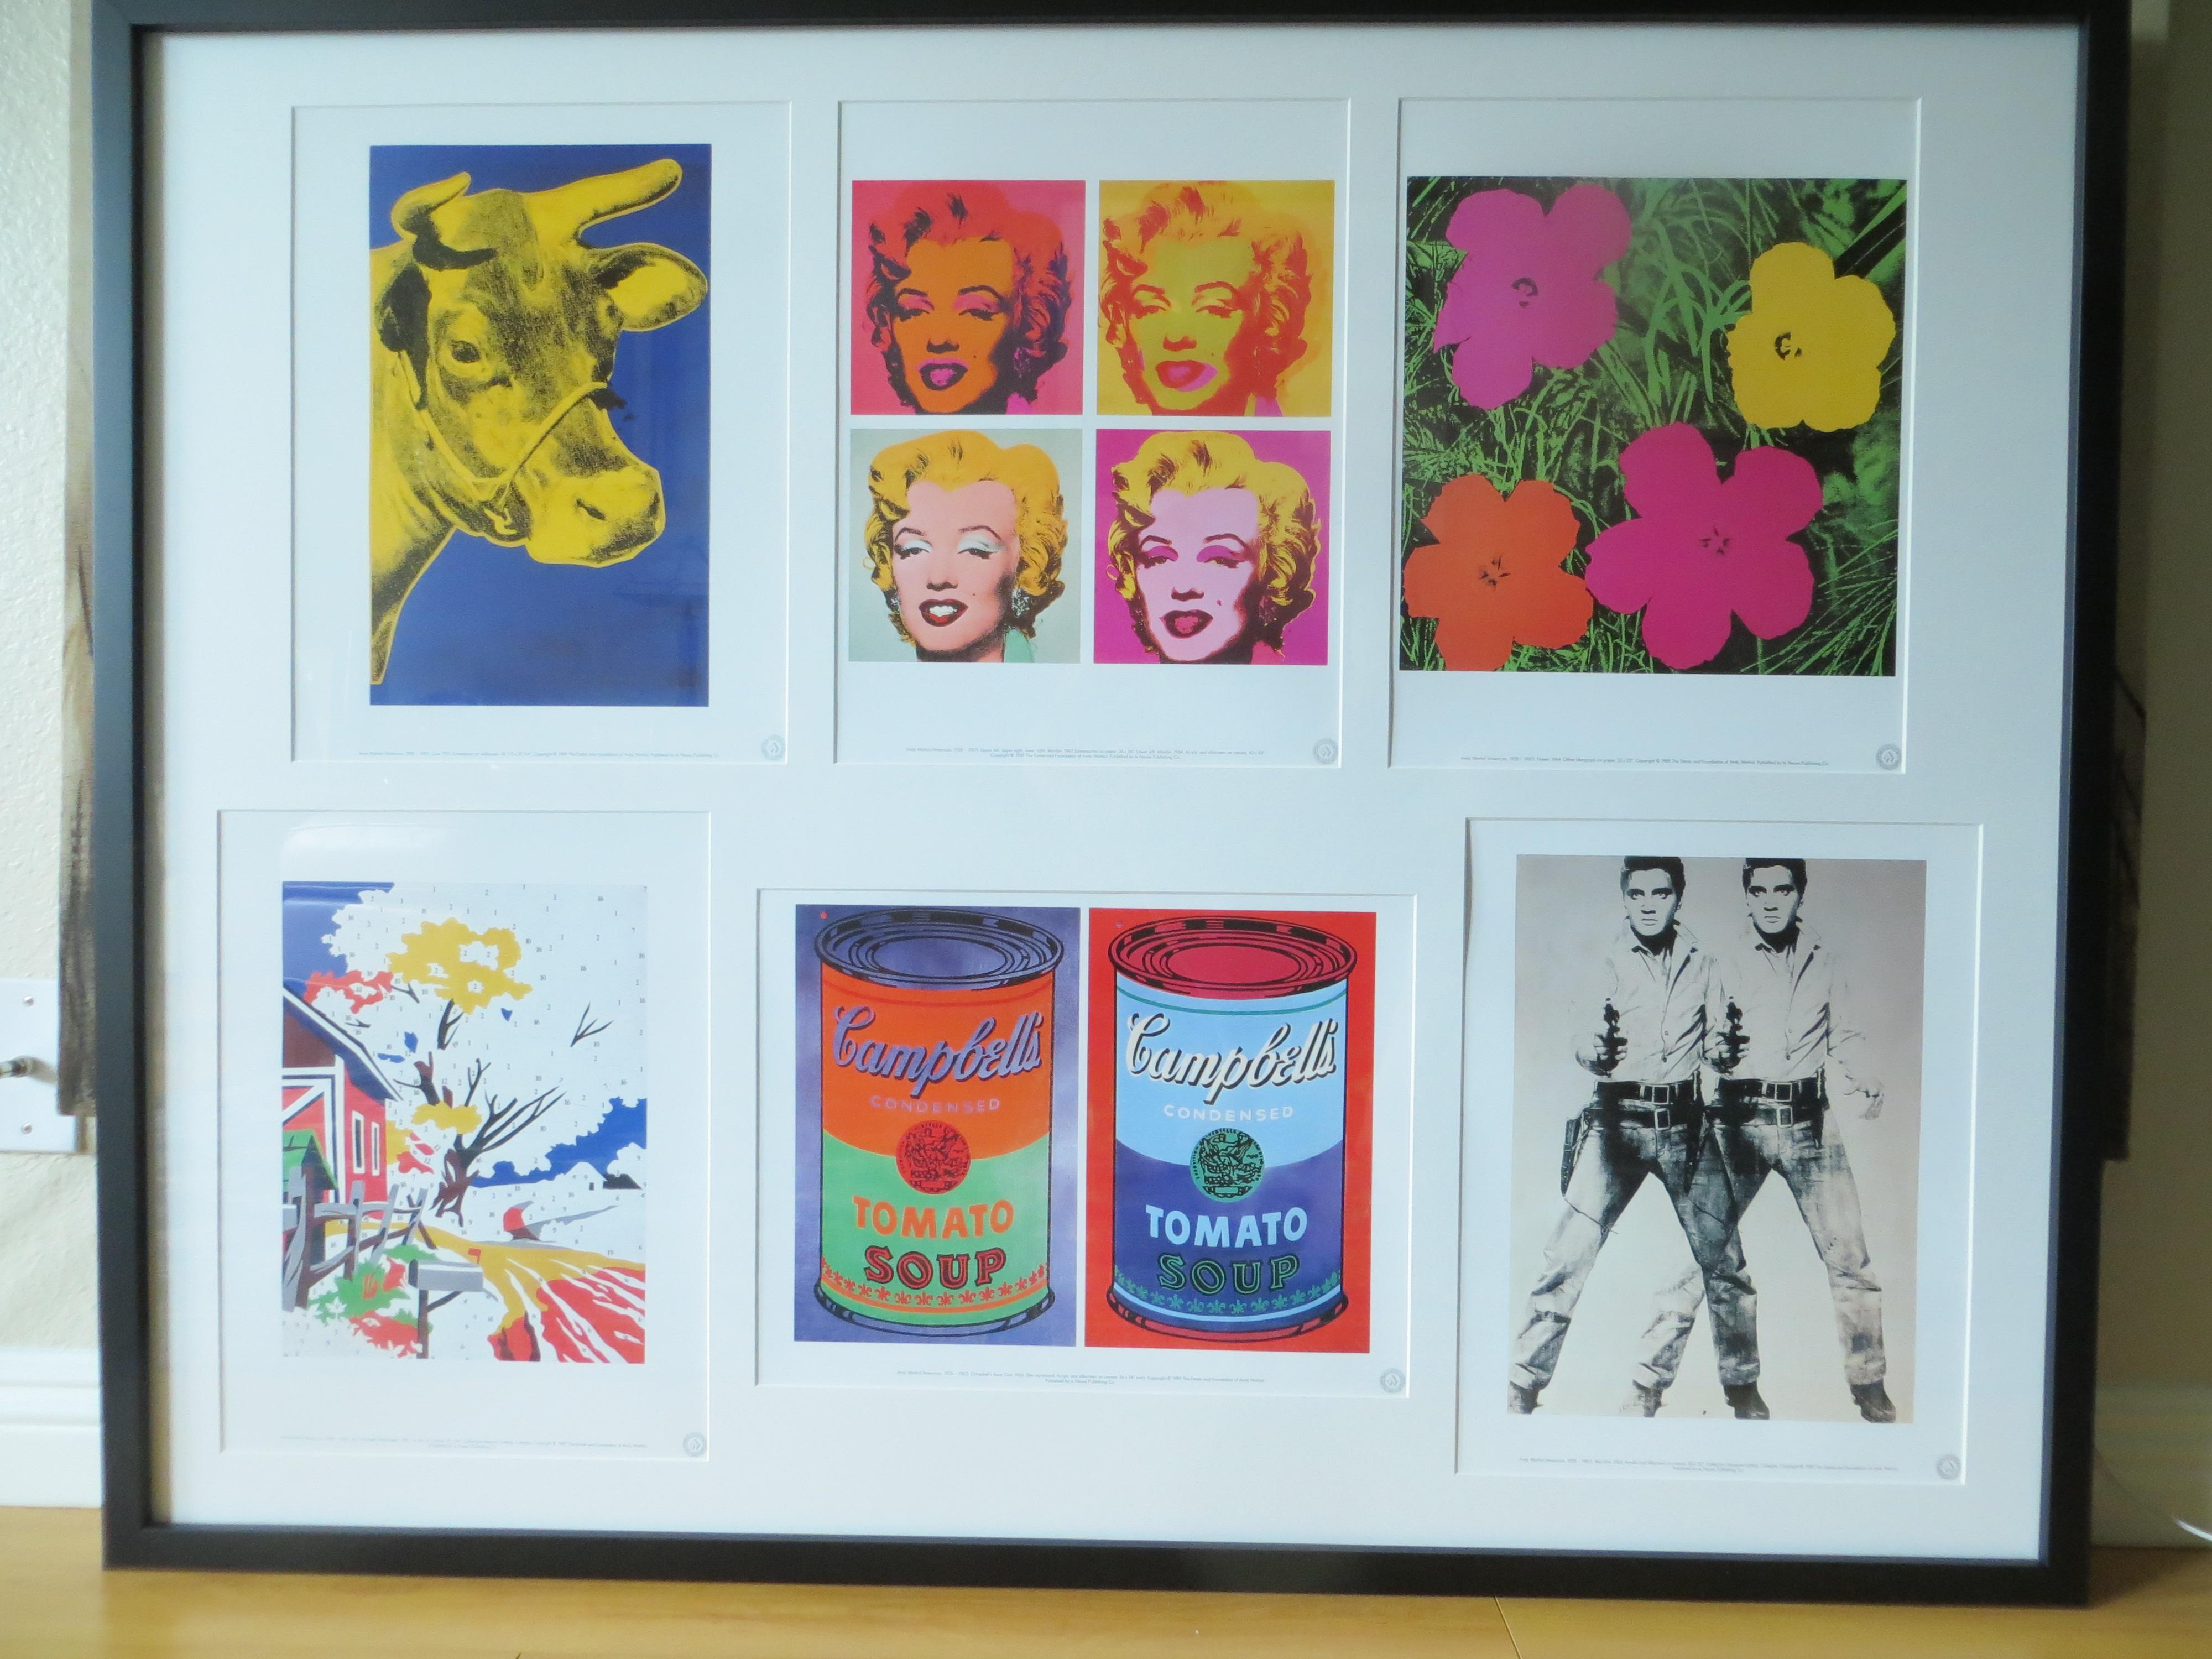 Andy Warhol Pop Art A Portfolio of Six Works art prints for sale. 
Custom Framed by a professional Framer.
Published by Te Neues publishing company, the portfolio with the ISBN 3-8238-8022-5. With a copyright date of 1989 and with permission by The